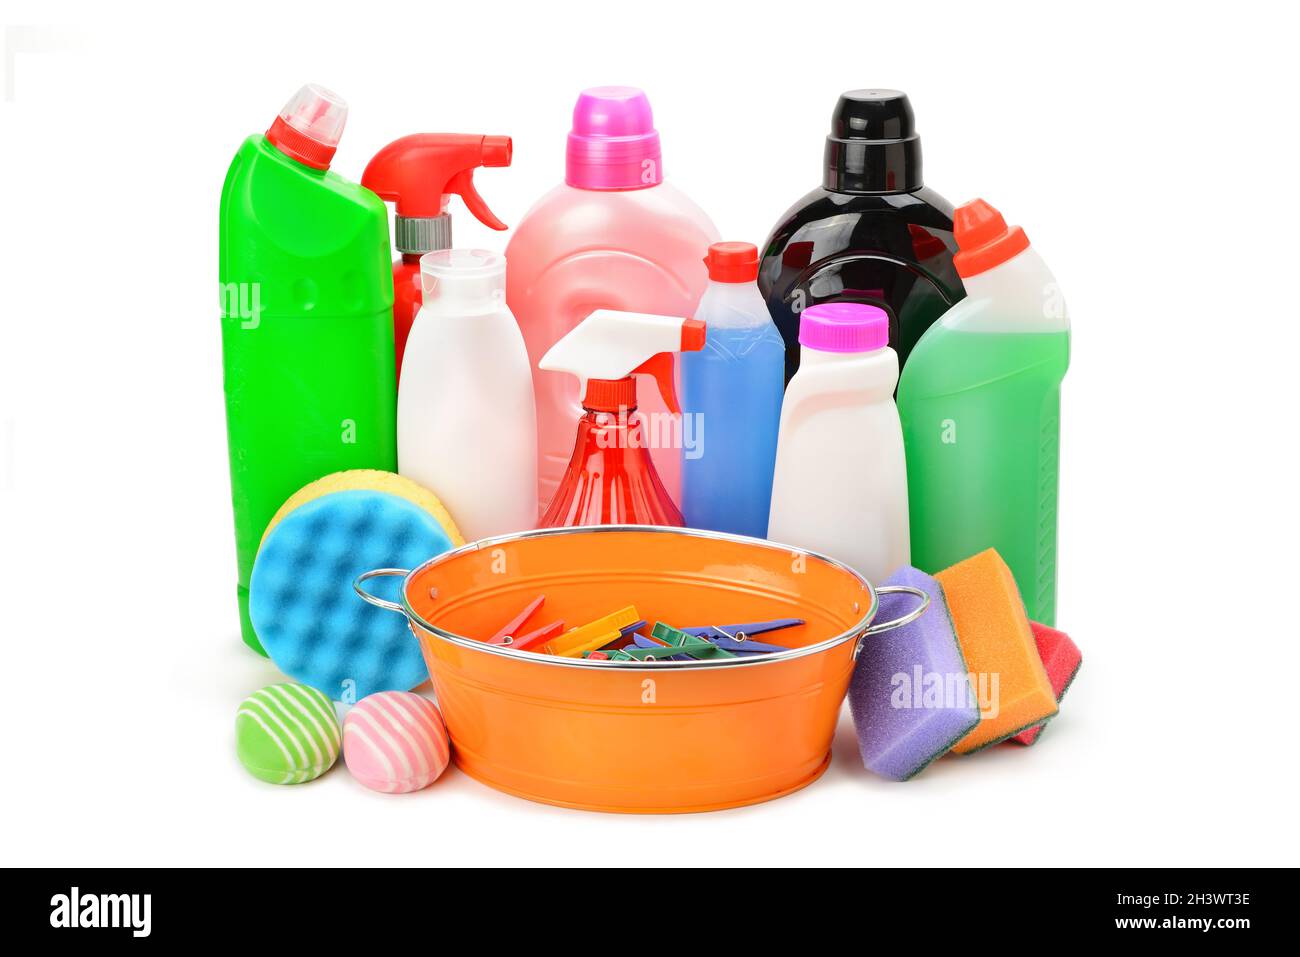 Collection of various household cleaning products isolated on a